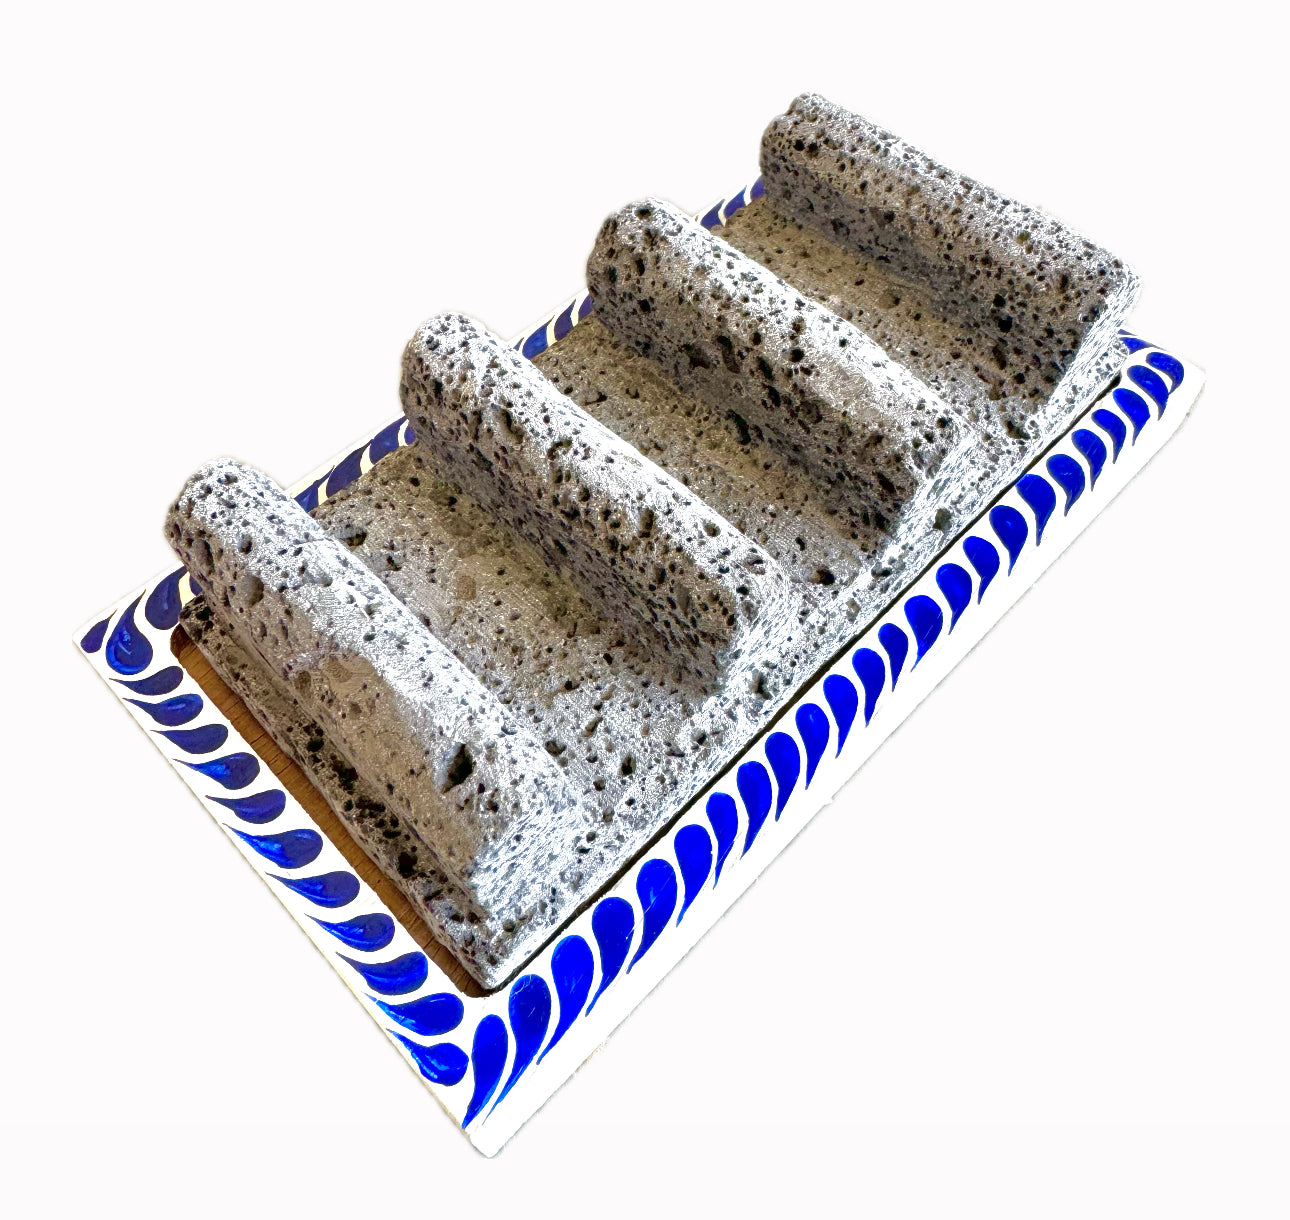 Mexican Volcanic Rock and Parota 9" 3 Taco Holder Stand- Blue CoLores Decor l Mexican Artisan Decor